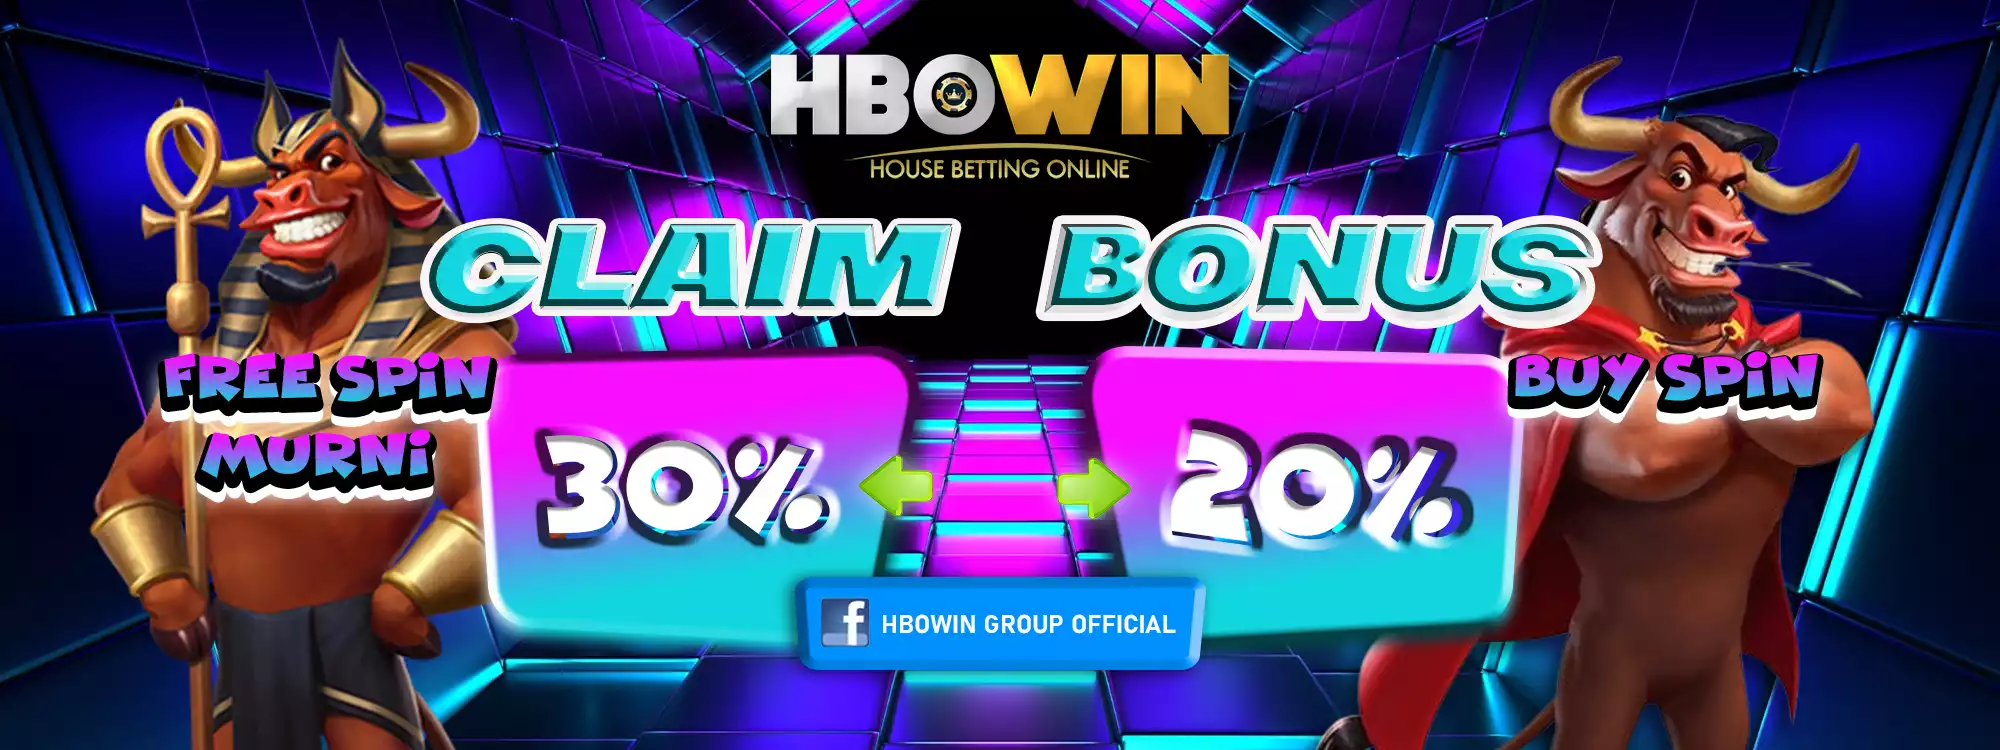 EVENT FREE SPIN & BUY SPIN HBOWIN